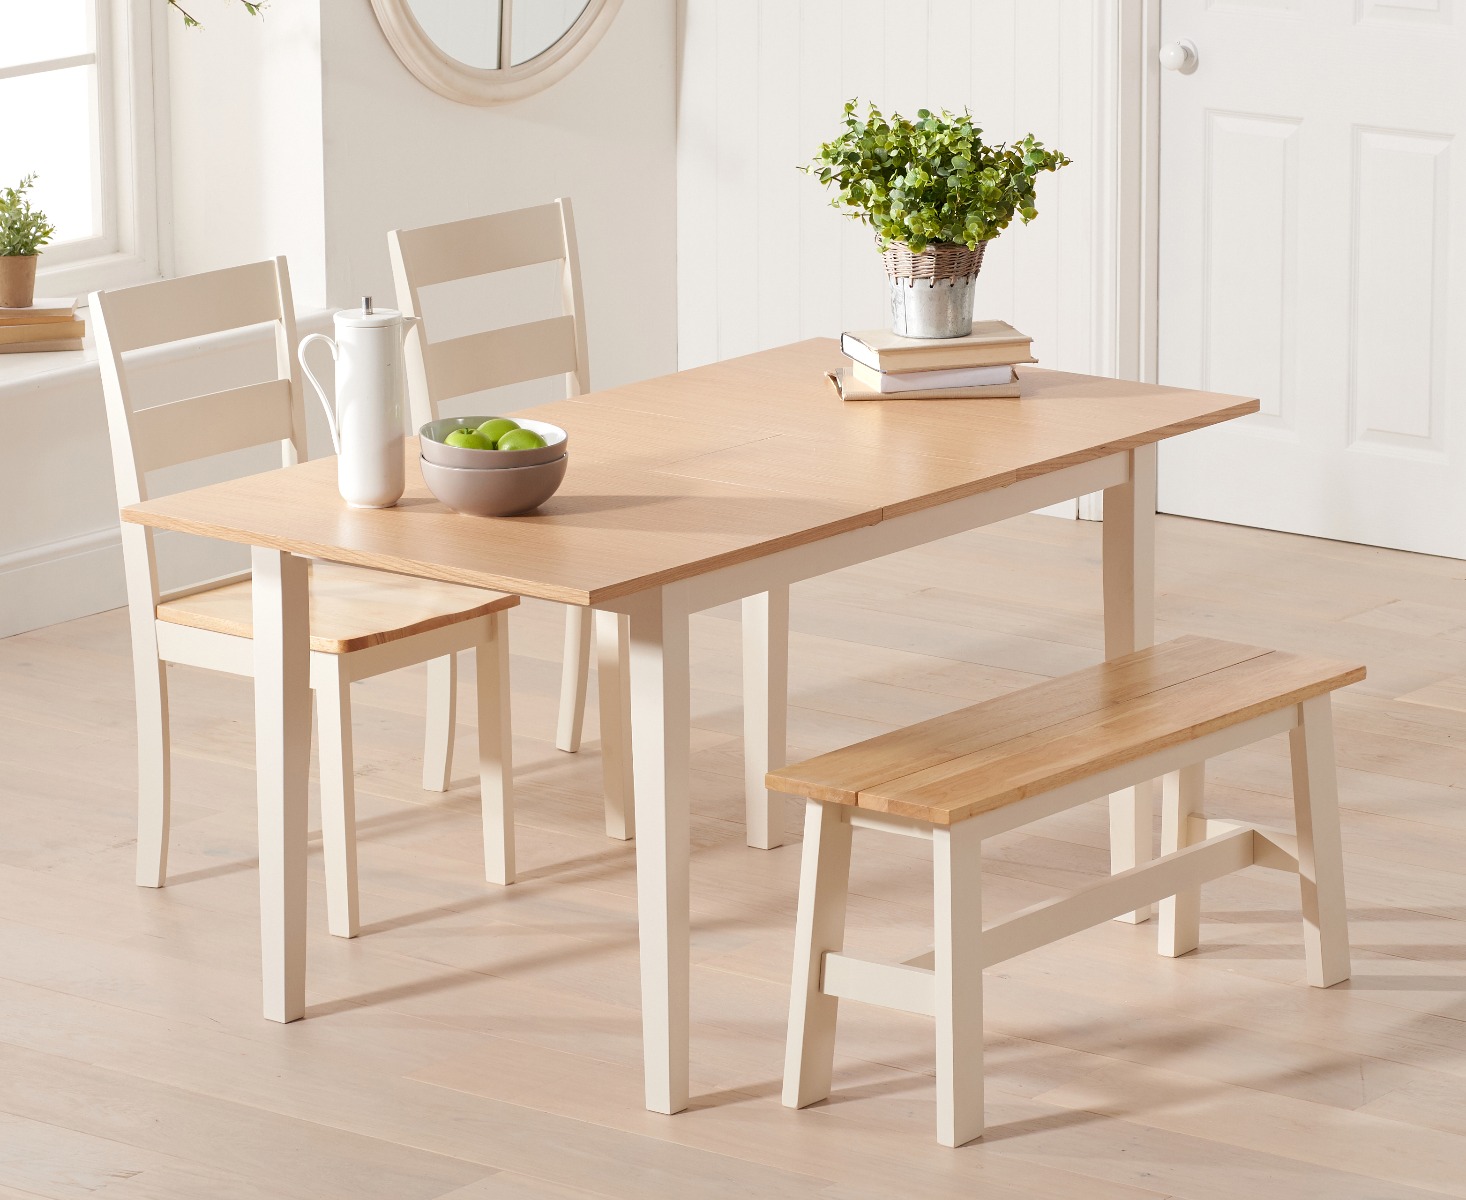 Chiltern 120cm Extending Cream And Oak Painted Table With Chiltern Chairs And Bench